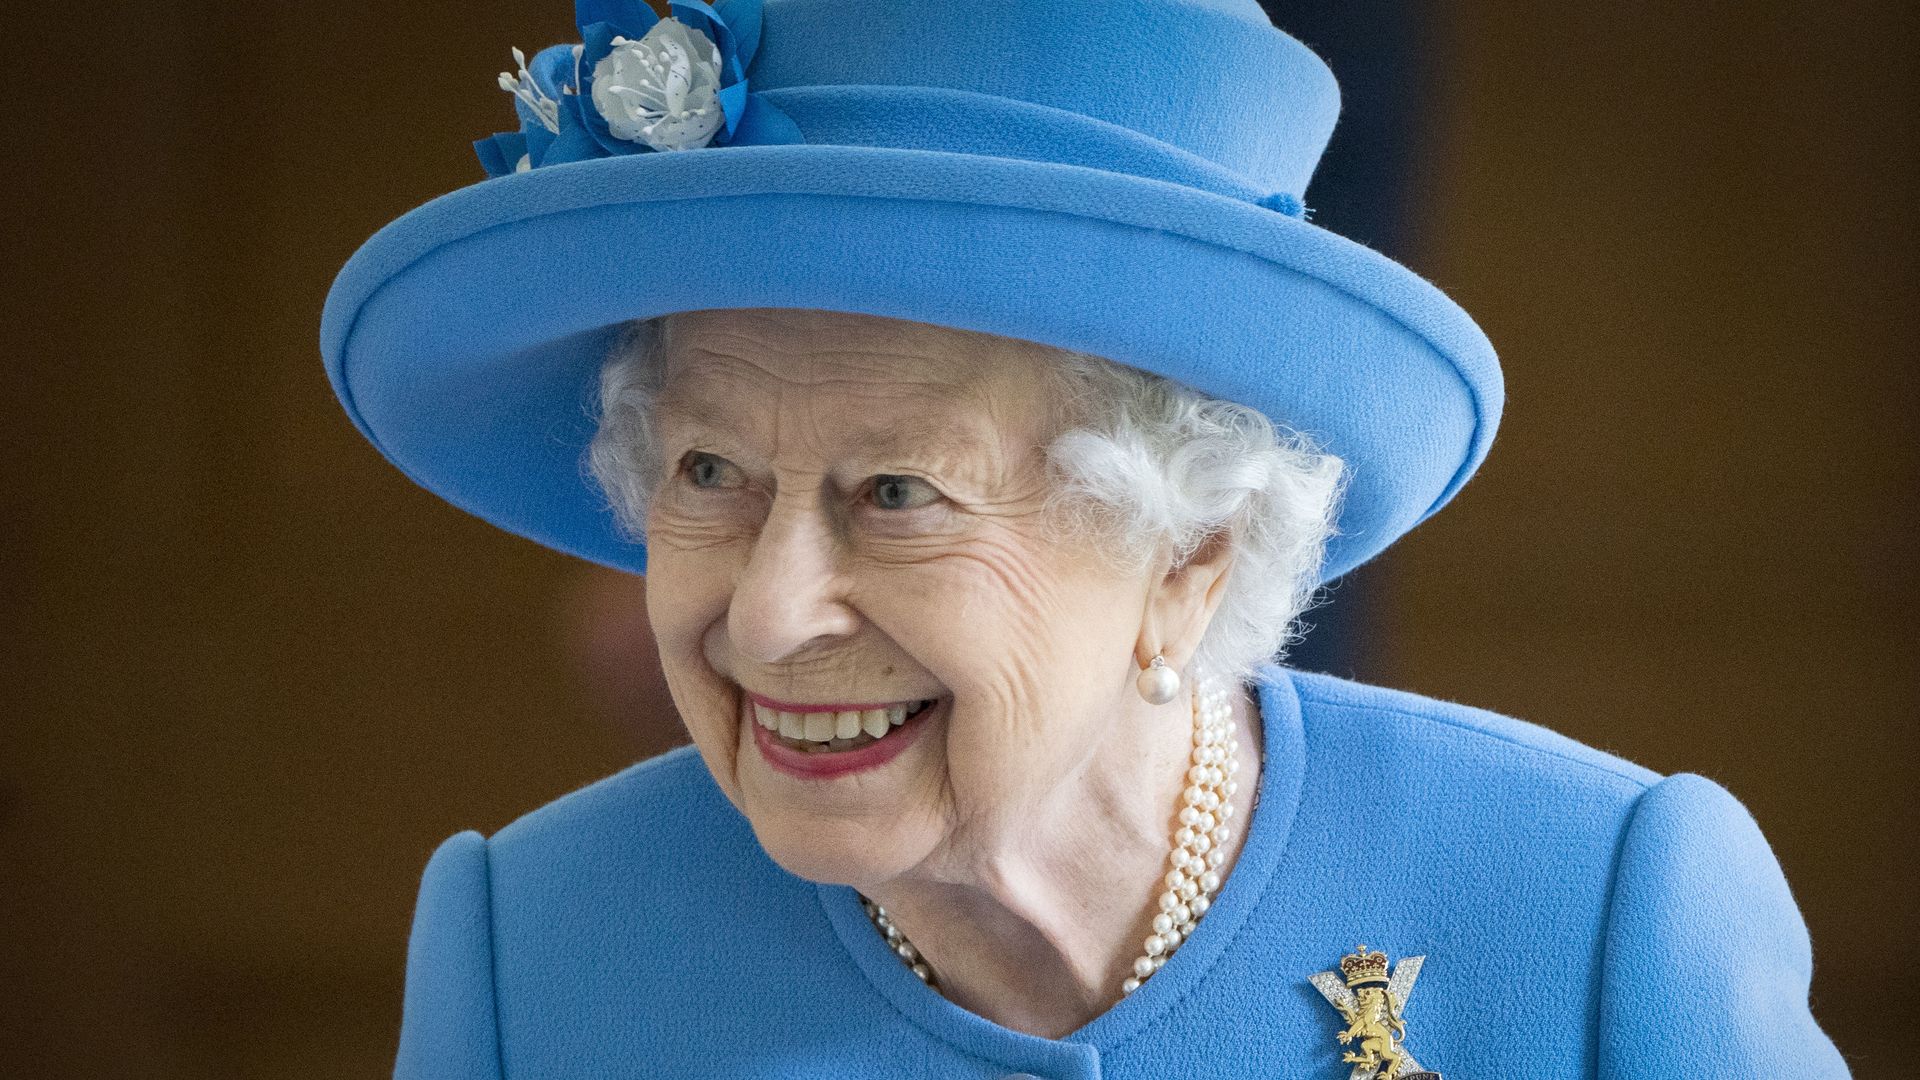 Queen Elizabeth II as she thanks local volunteers for their efforts during the pandemic on June 28, 2021 in Edinburgh, Scotland.